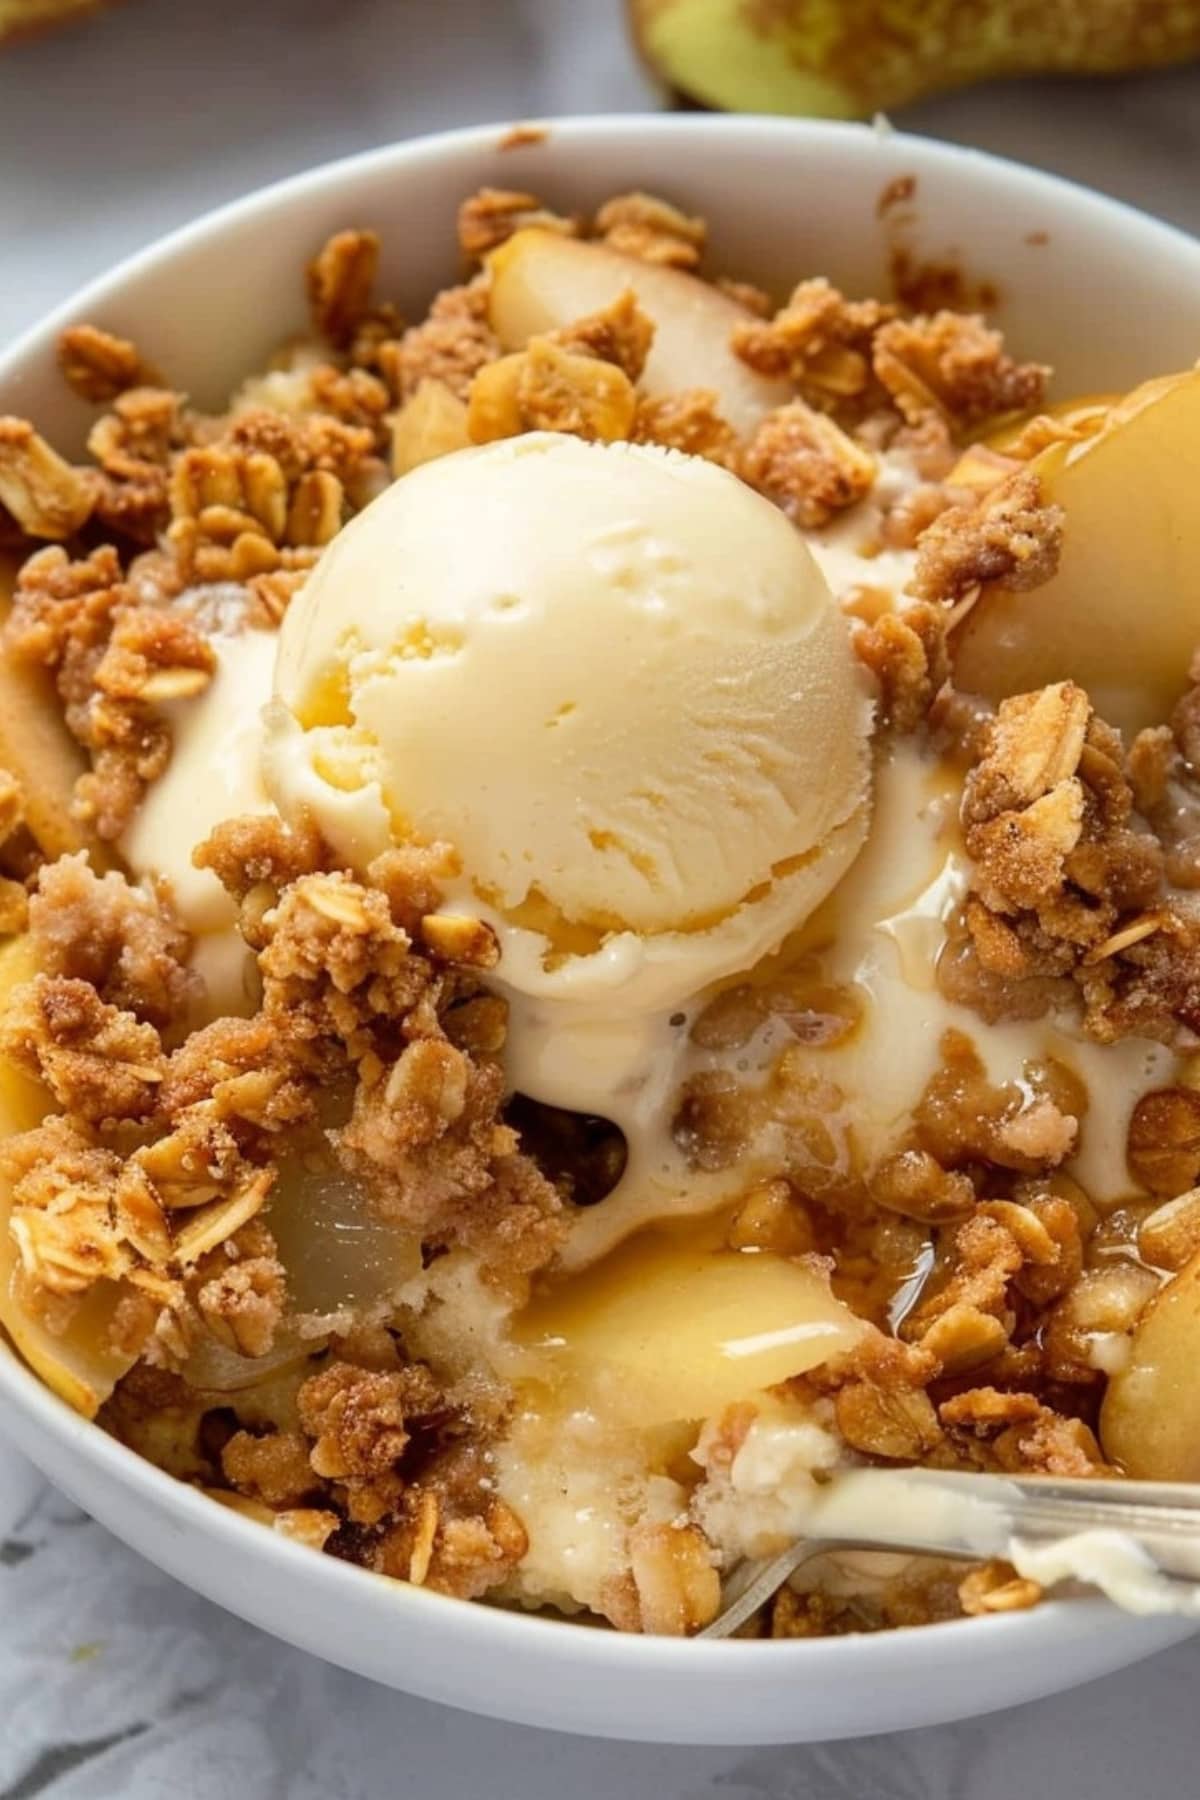 Pear crisp served in a white bowl topped with scoop of vanilla ice cream.